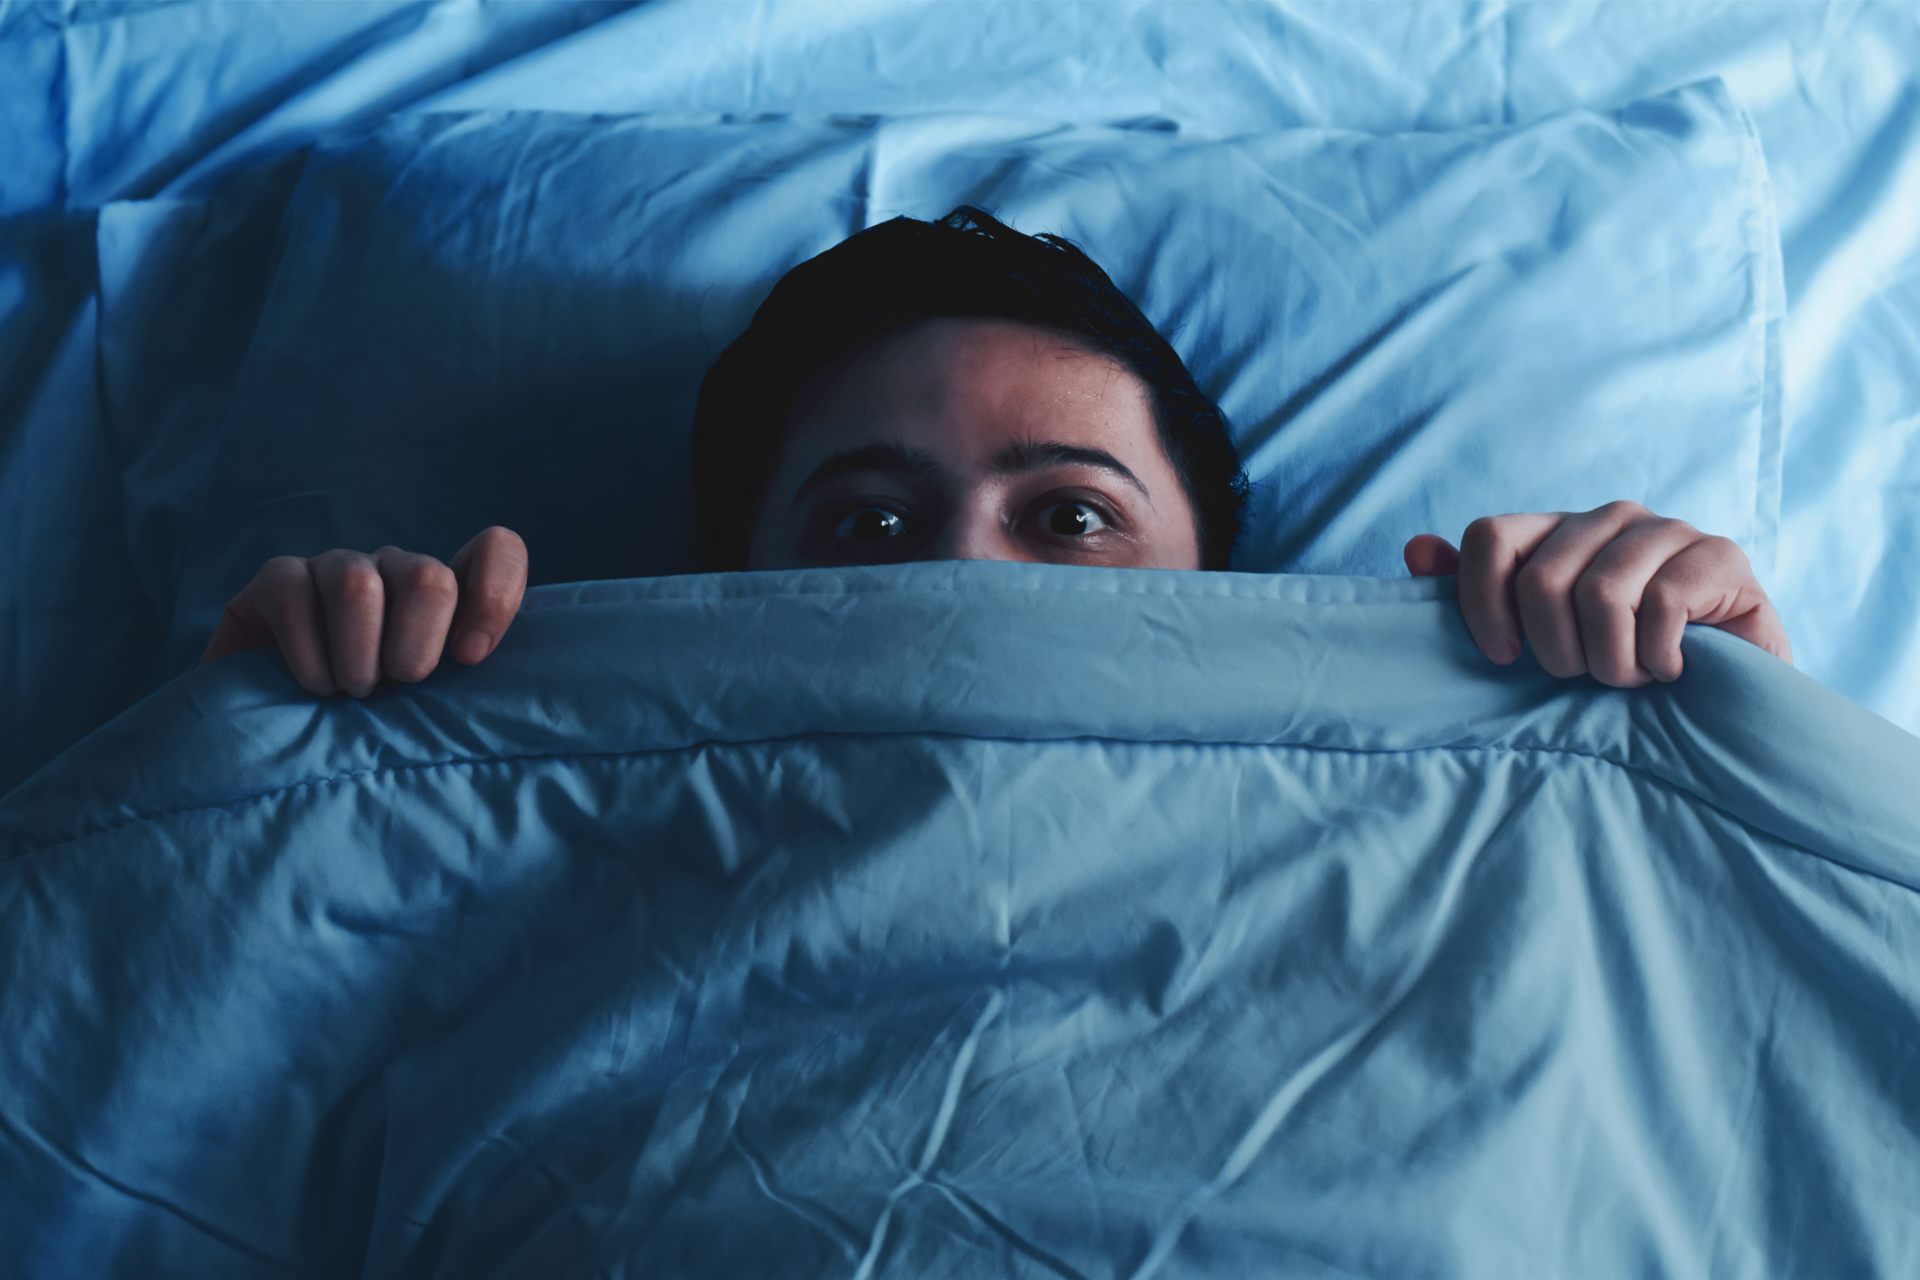 An anxious man laying in bed hiding his face under the sheets.